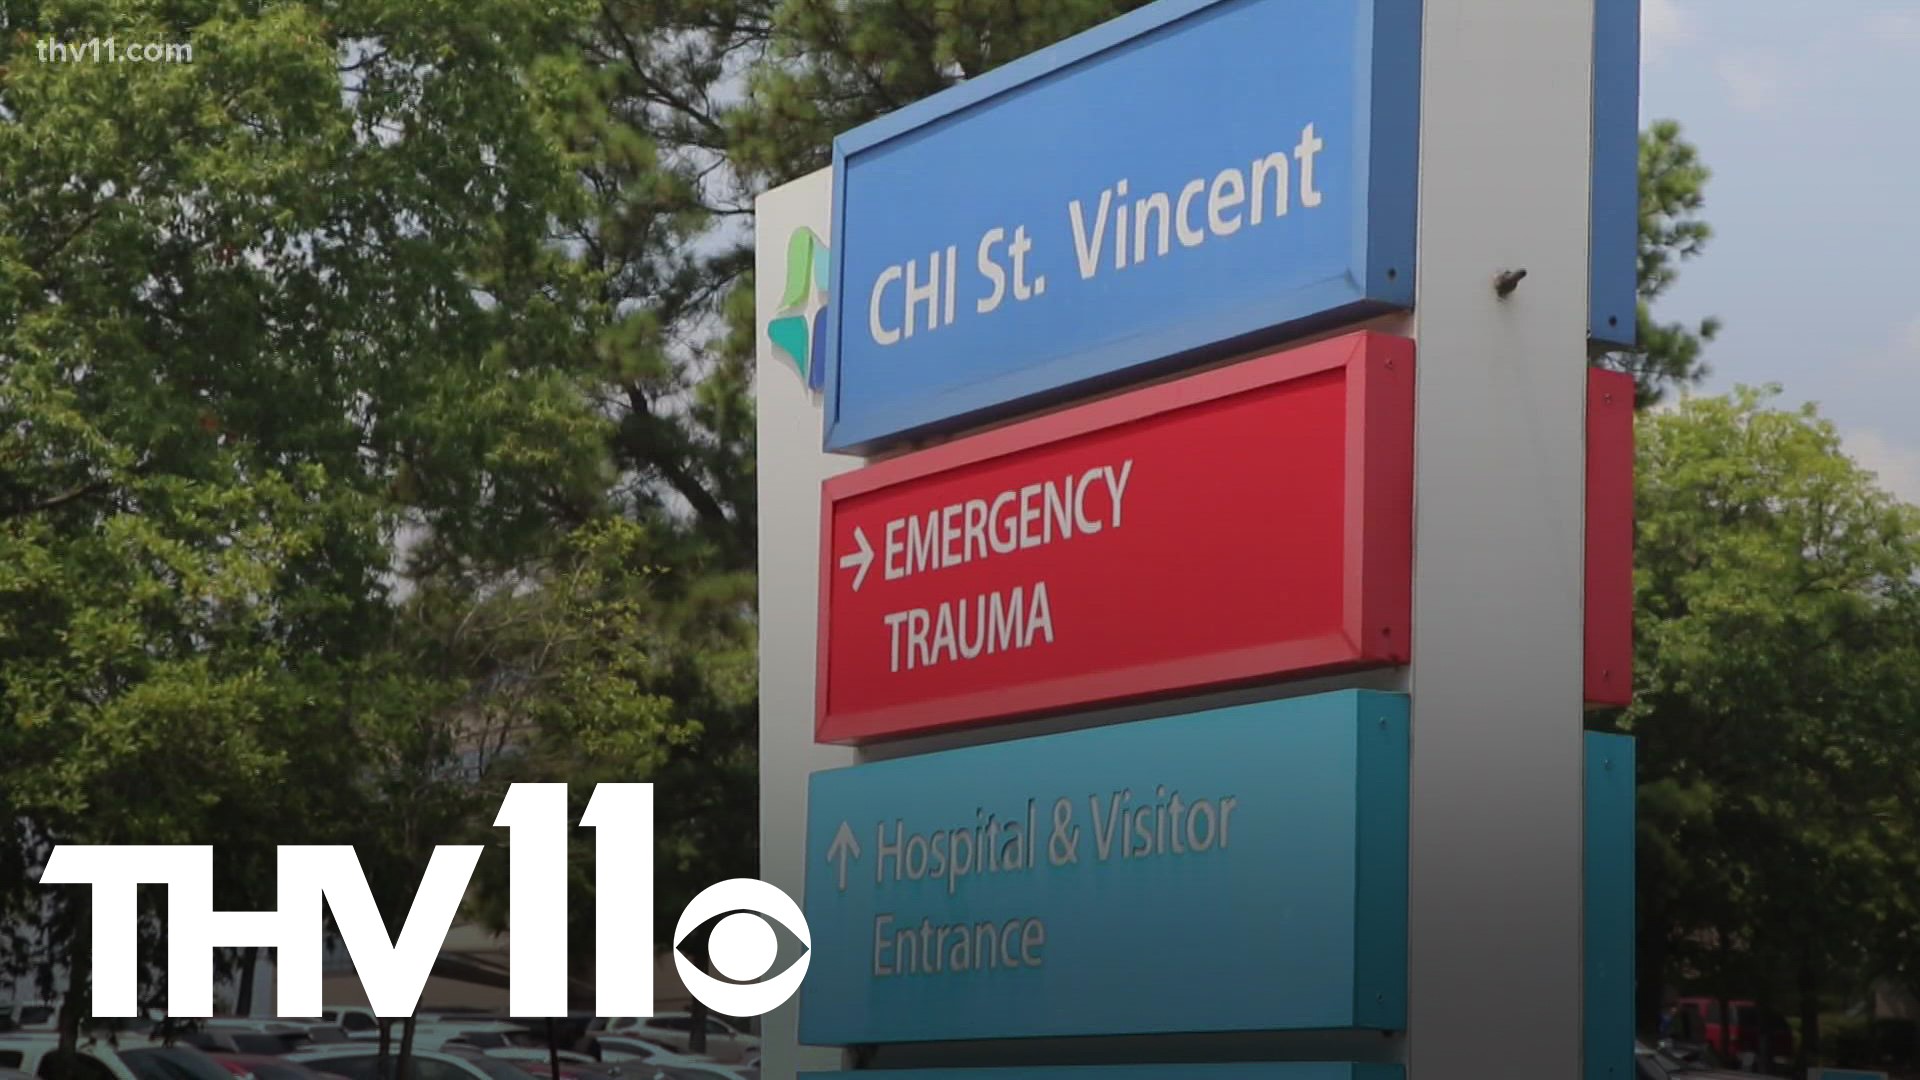 CHI St. Vincent Hot Springs announced that the hospital will temporarily postpone elective surgeries and procedures as COVID cases continue to surge.